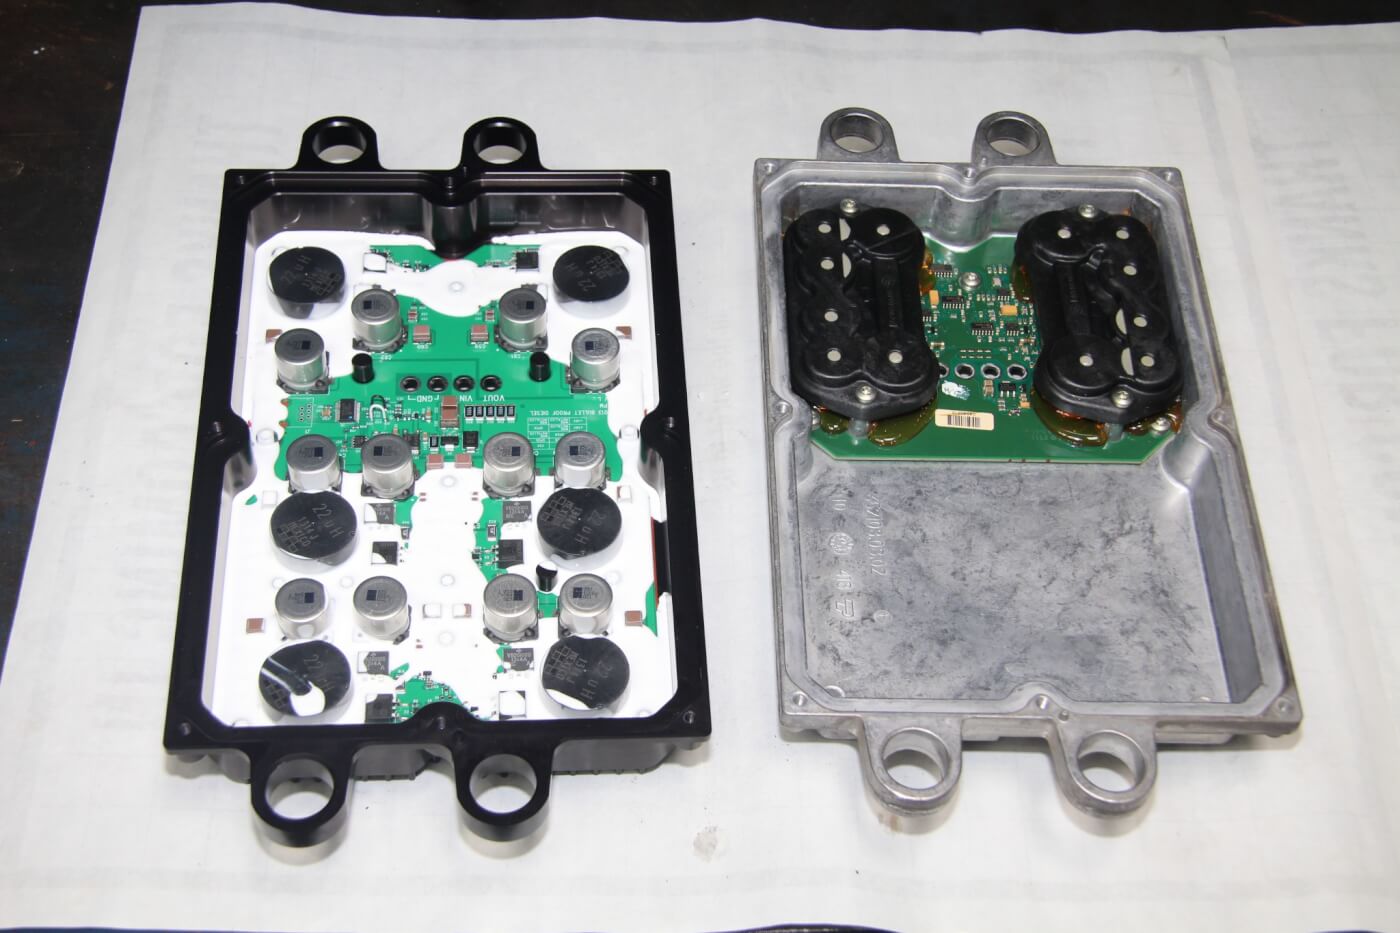 8. Here we see the Bullet Proof FICM power supply on the left and the OEM unit on the right. The Bullet Proof part seen here has the six-phase upgrade. Both four- and six-phase Bullet Proof power supplies are superior to the OEM unit.